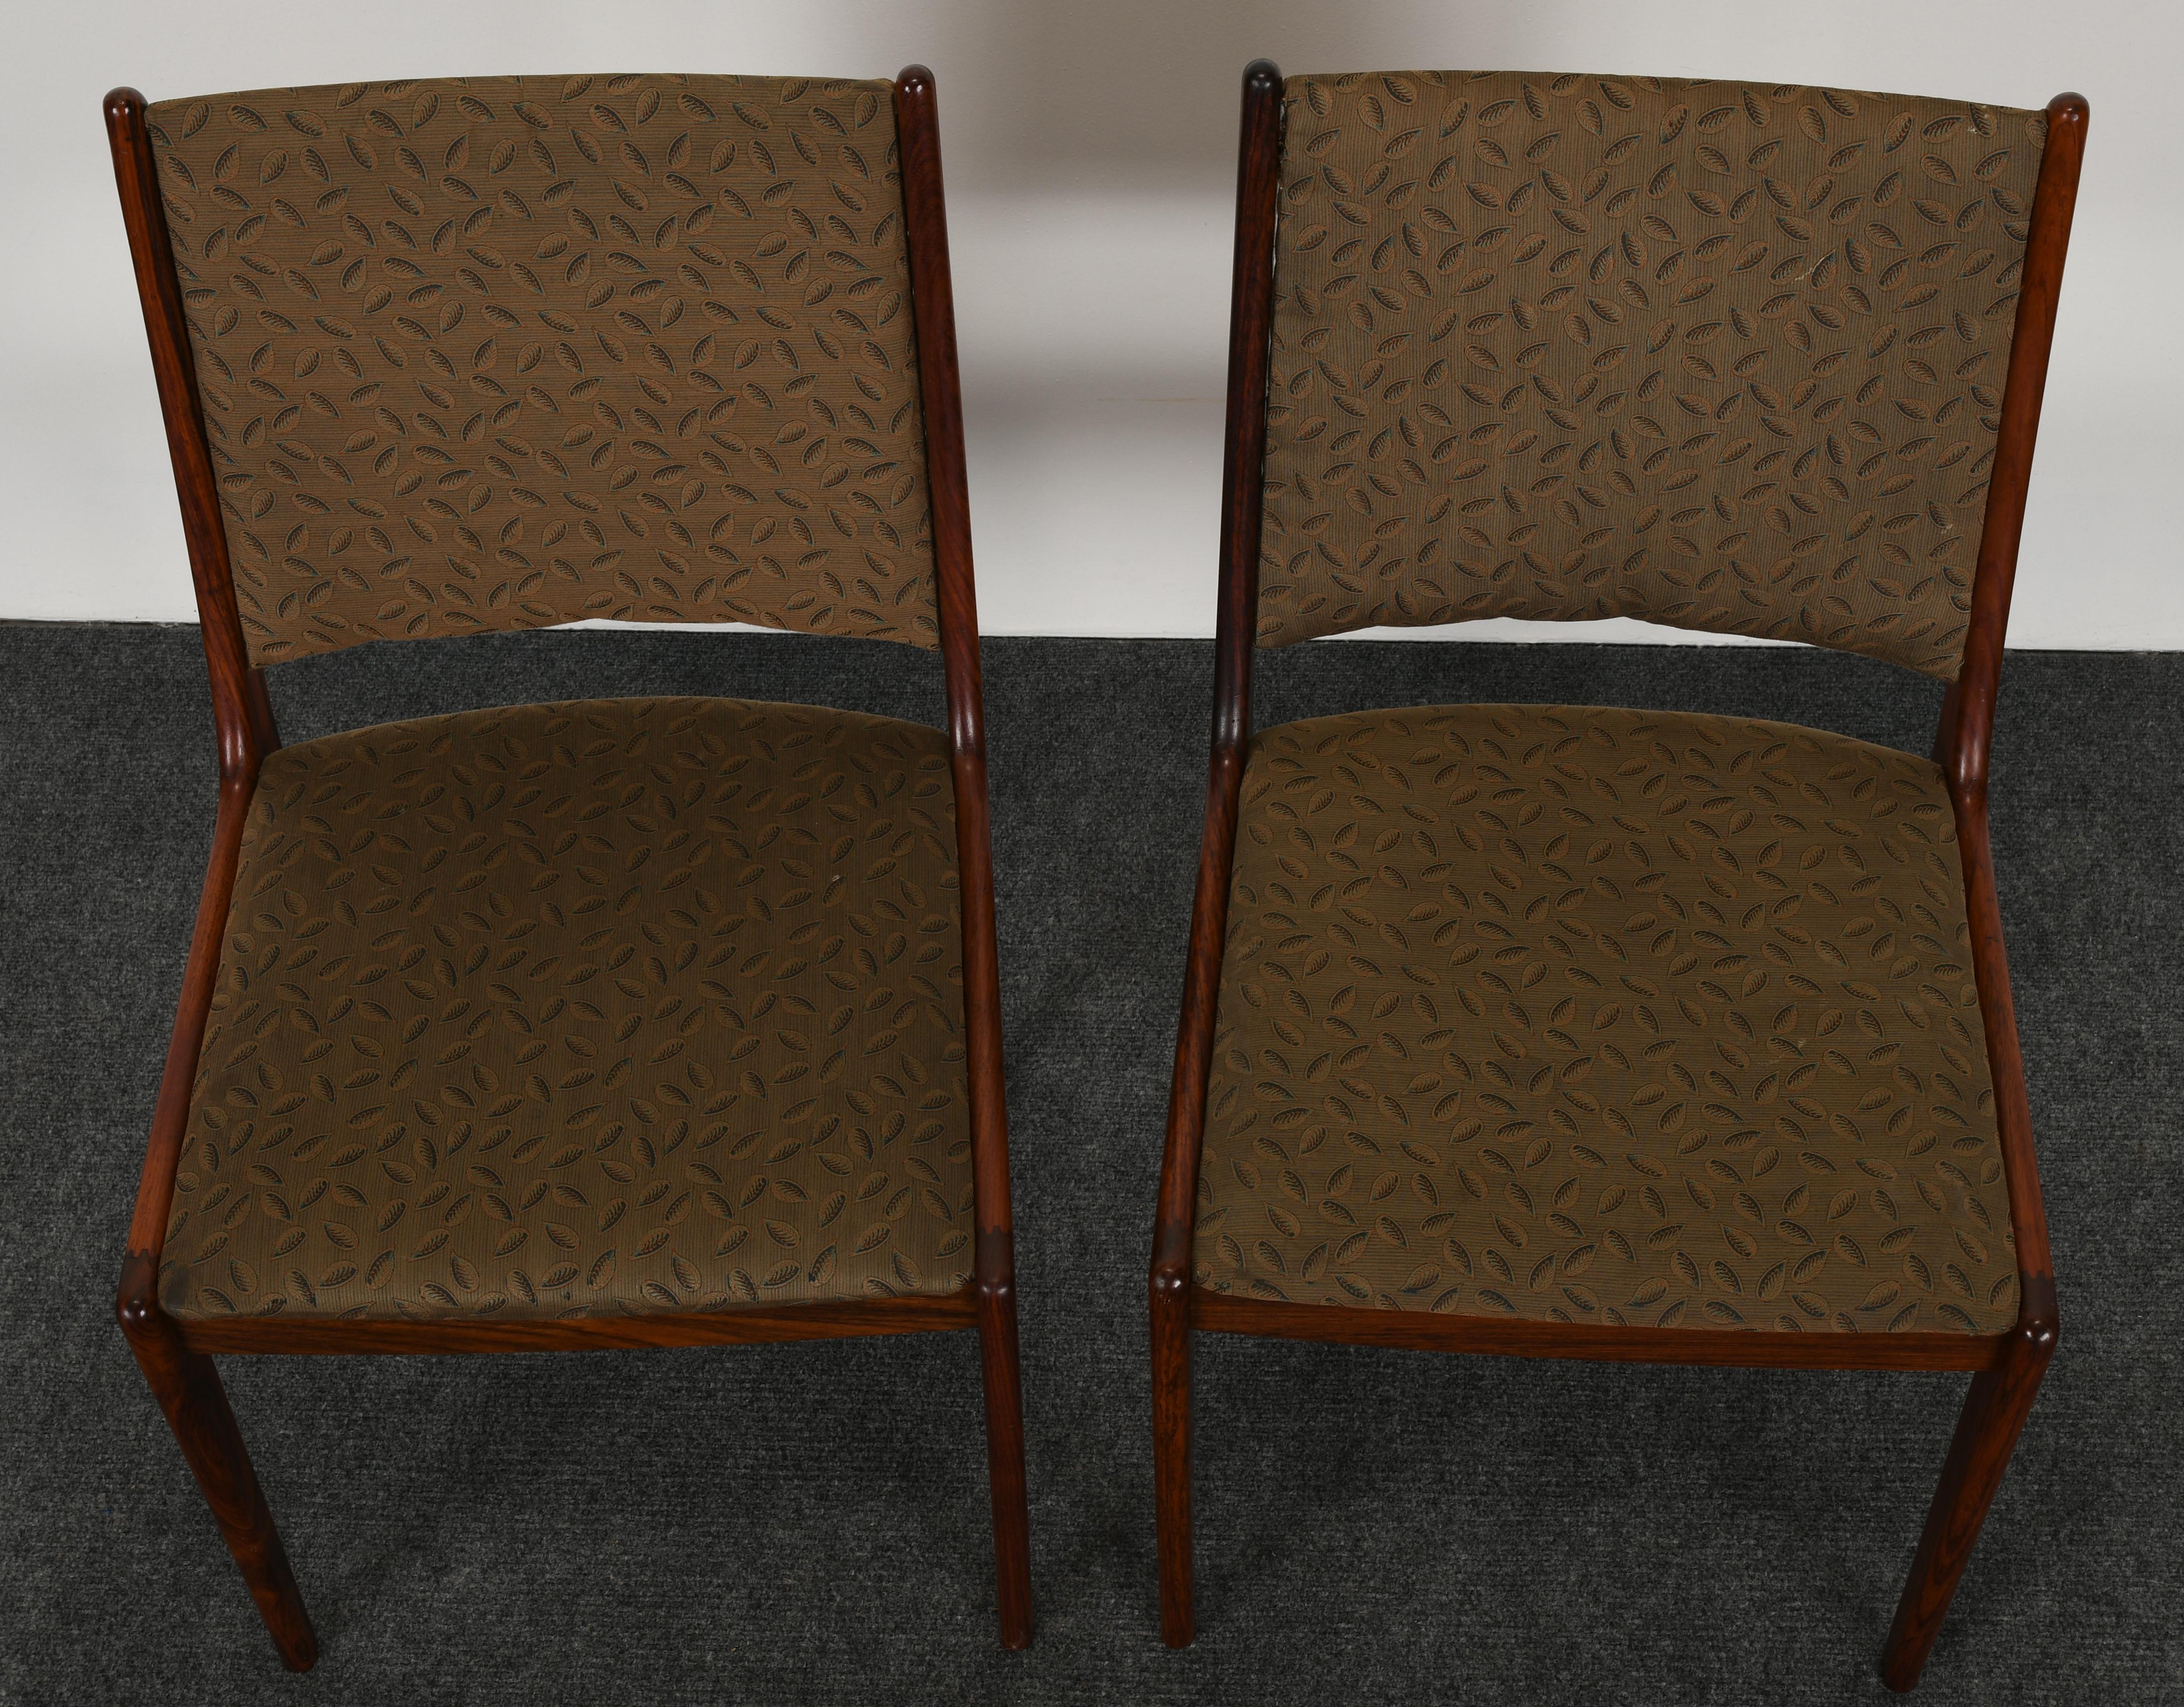 An exquisite pair of Danish rosewood side chairs by Johannes Andersen for Uldum Mobelfabrik. The chairs are structurally sound, however, new upholstery necessary. 

Dimensions: 33.5